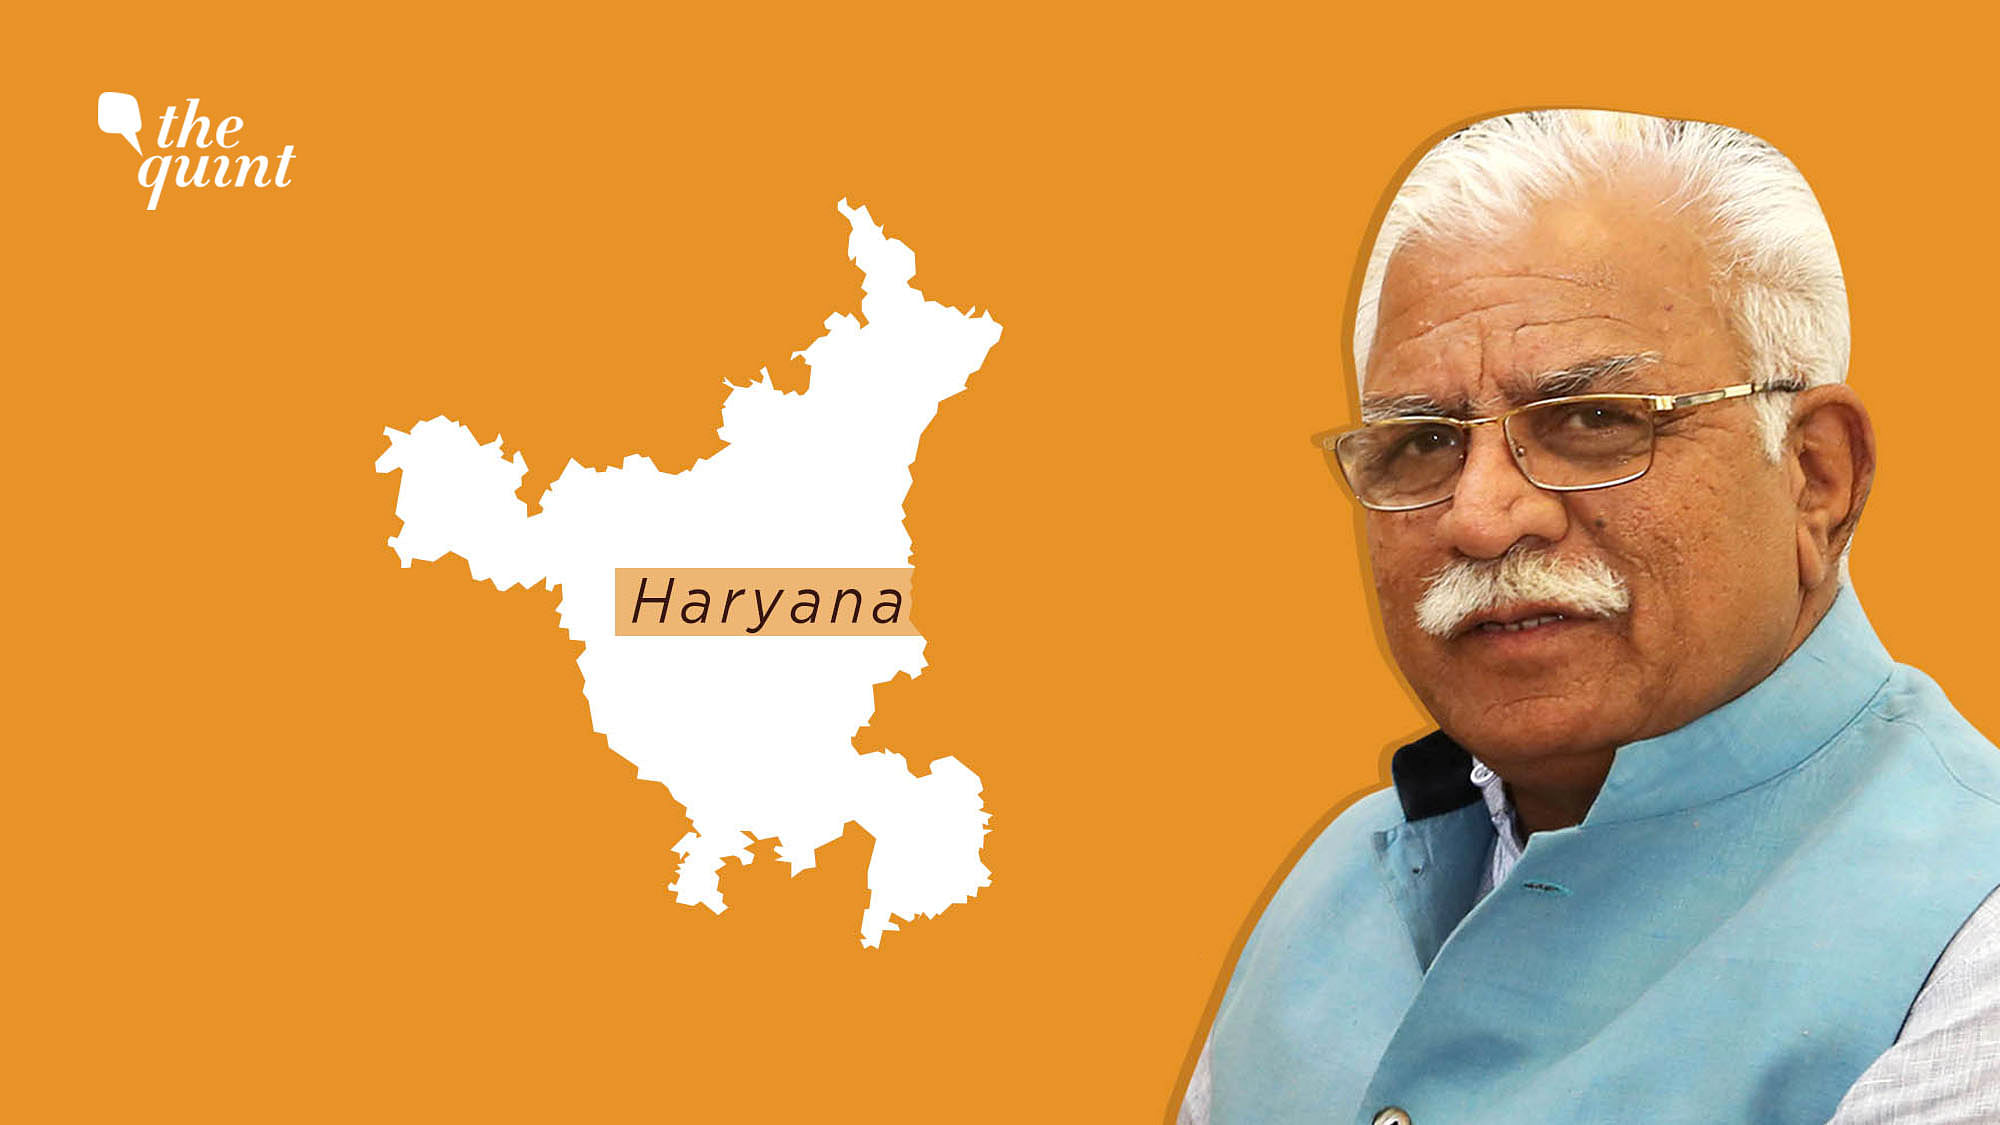 CVoter survey predicts a second term for Haryana Chief Minister Manohar Lal Khattar.